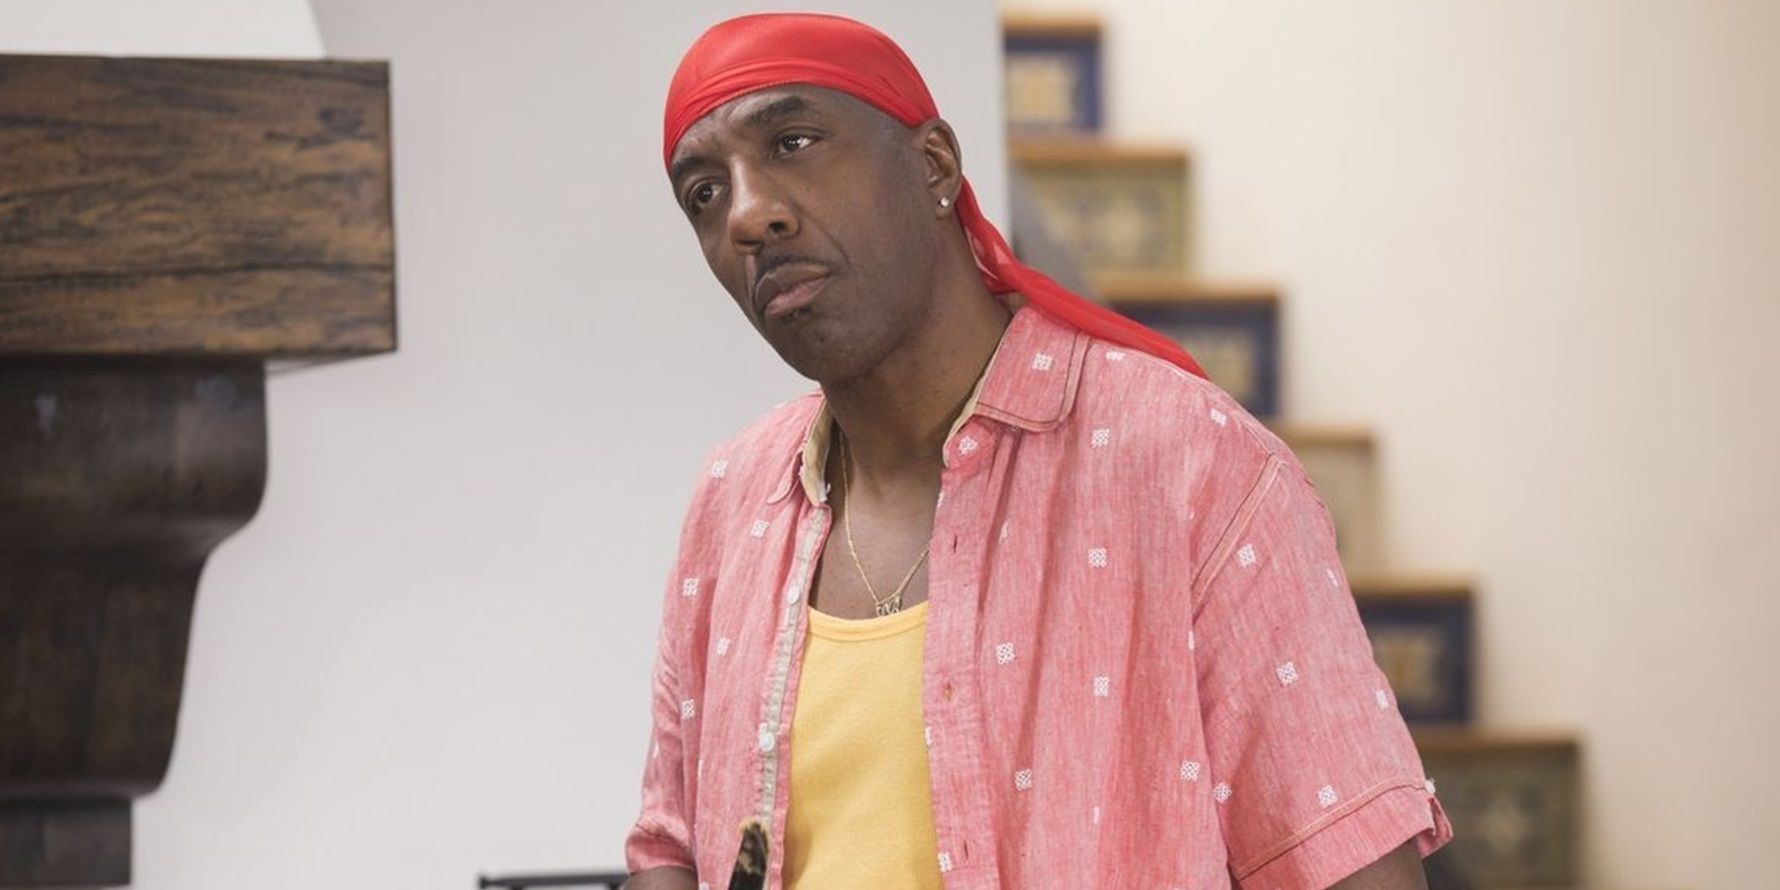 JB Smoove in Curb Your Enthusiasm